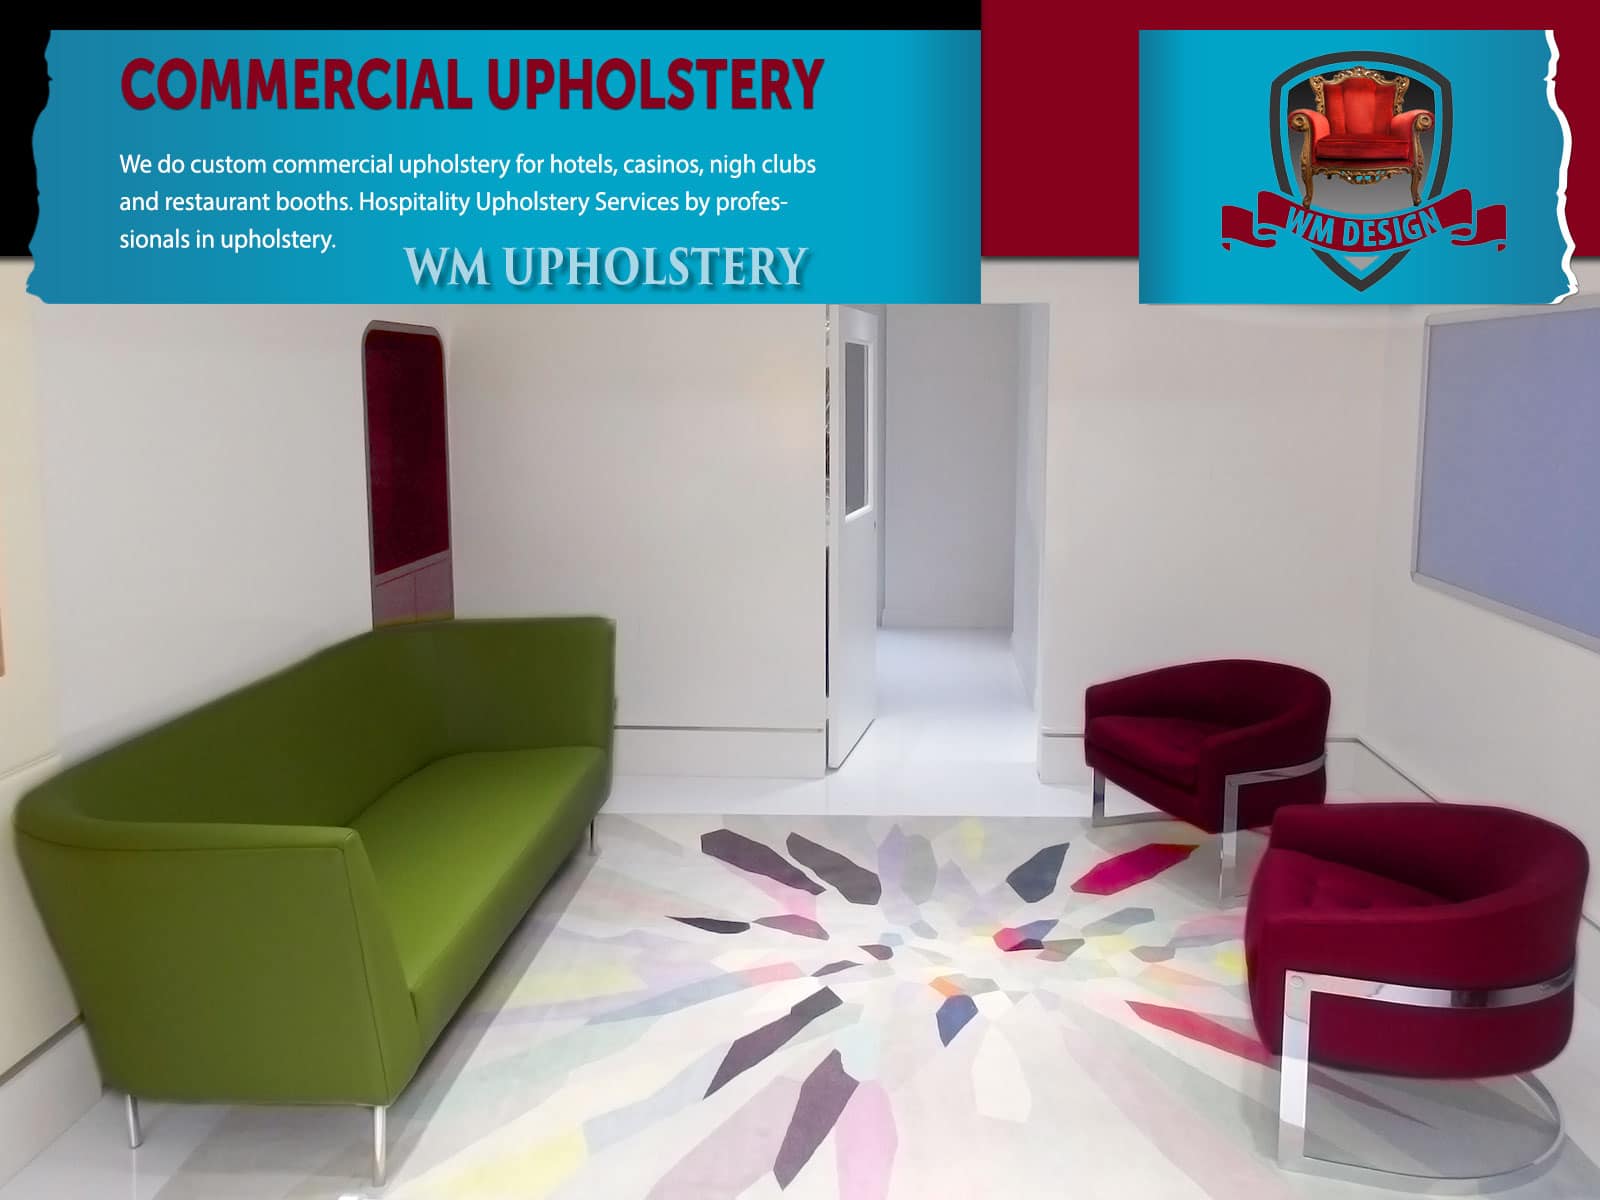 Ccommercial upholstery and reupholstery in Los Angeles California